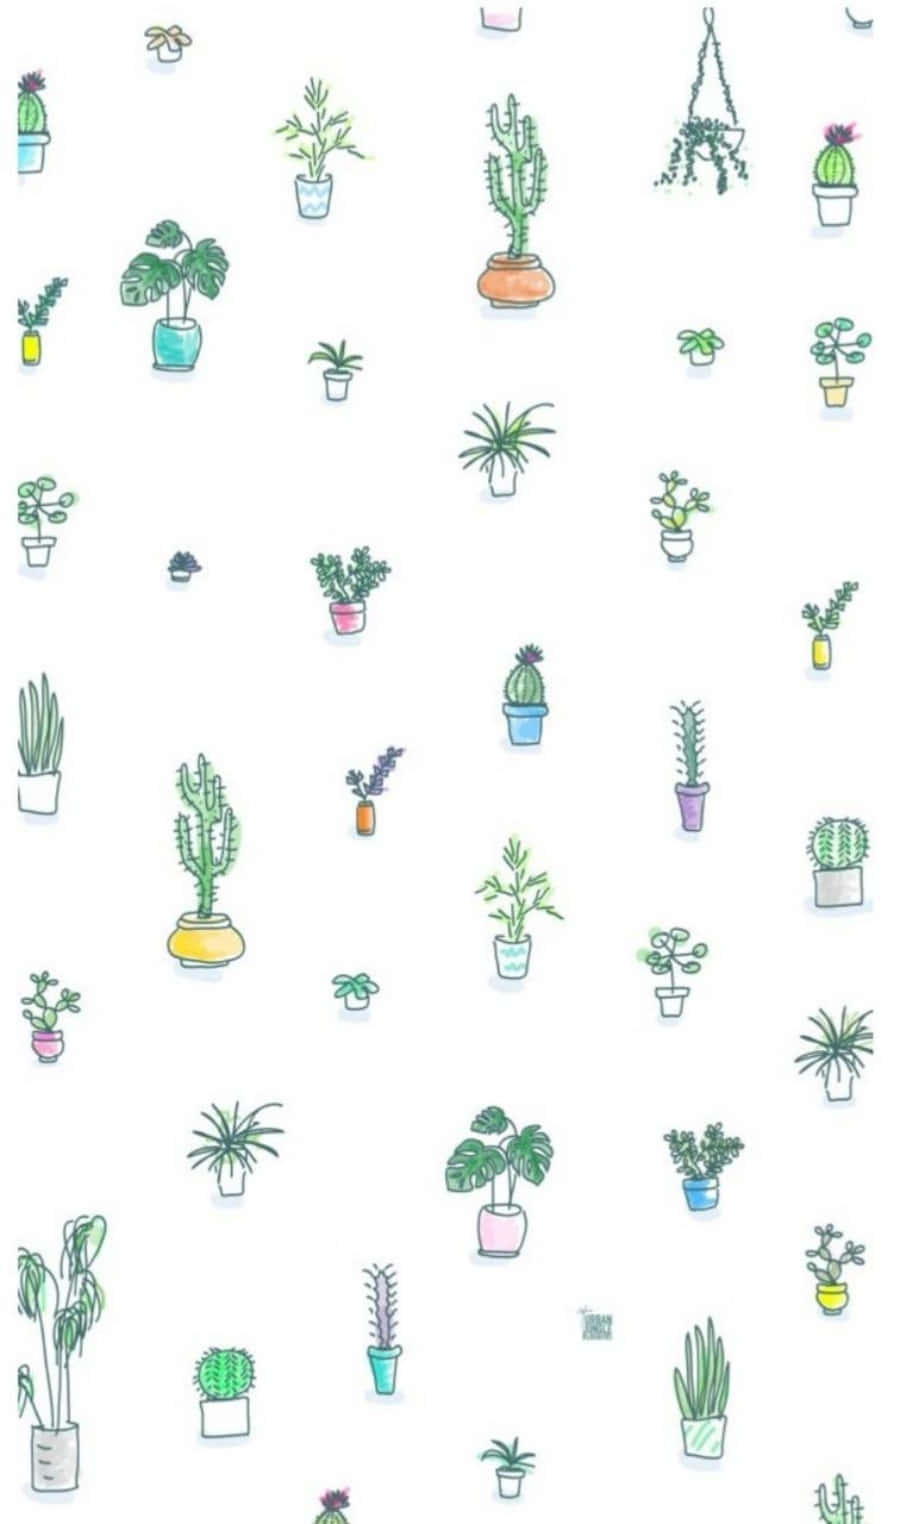 Soften up your work day with a Plant Aesthetic Phone Wallpaper